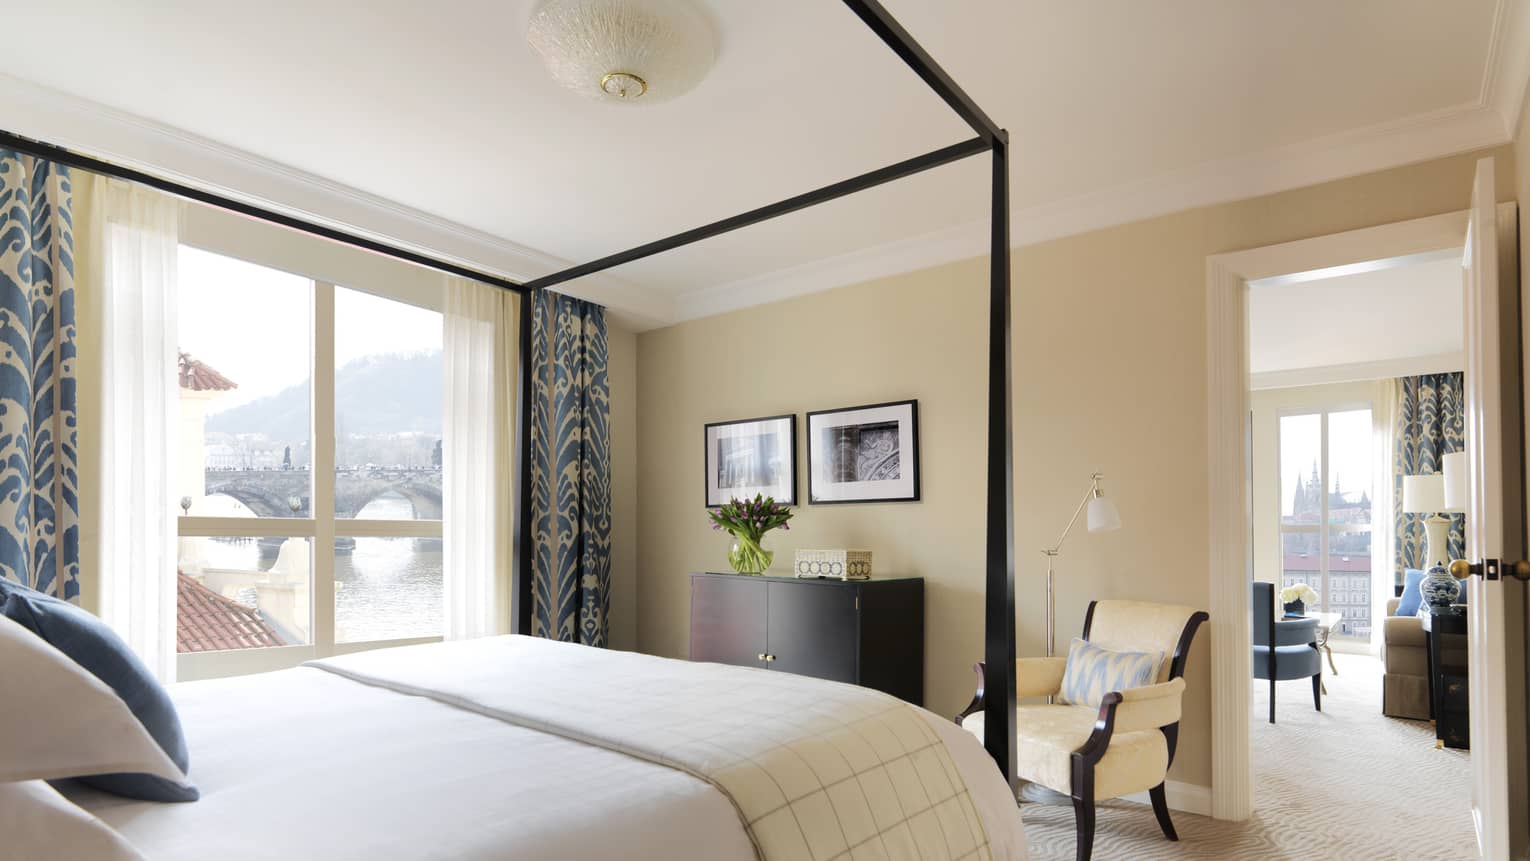 River Suite with modern ivory-coloured decor with blue accents on curtains, pillows, canopy bed frame